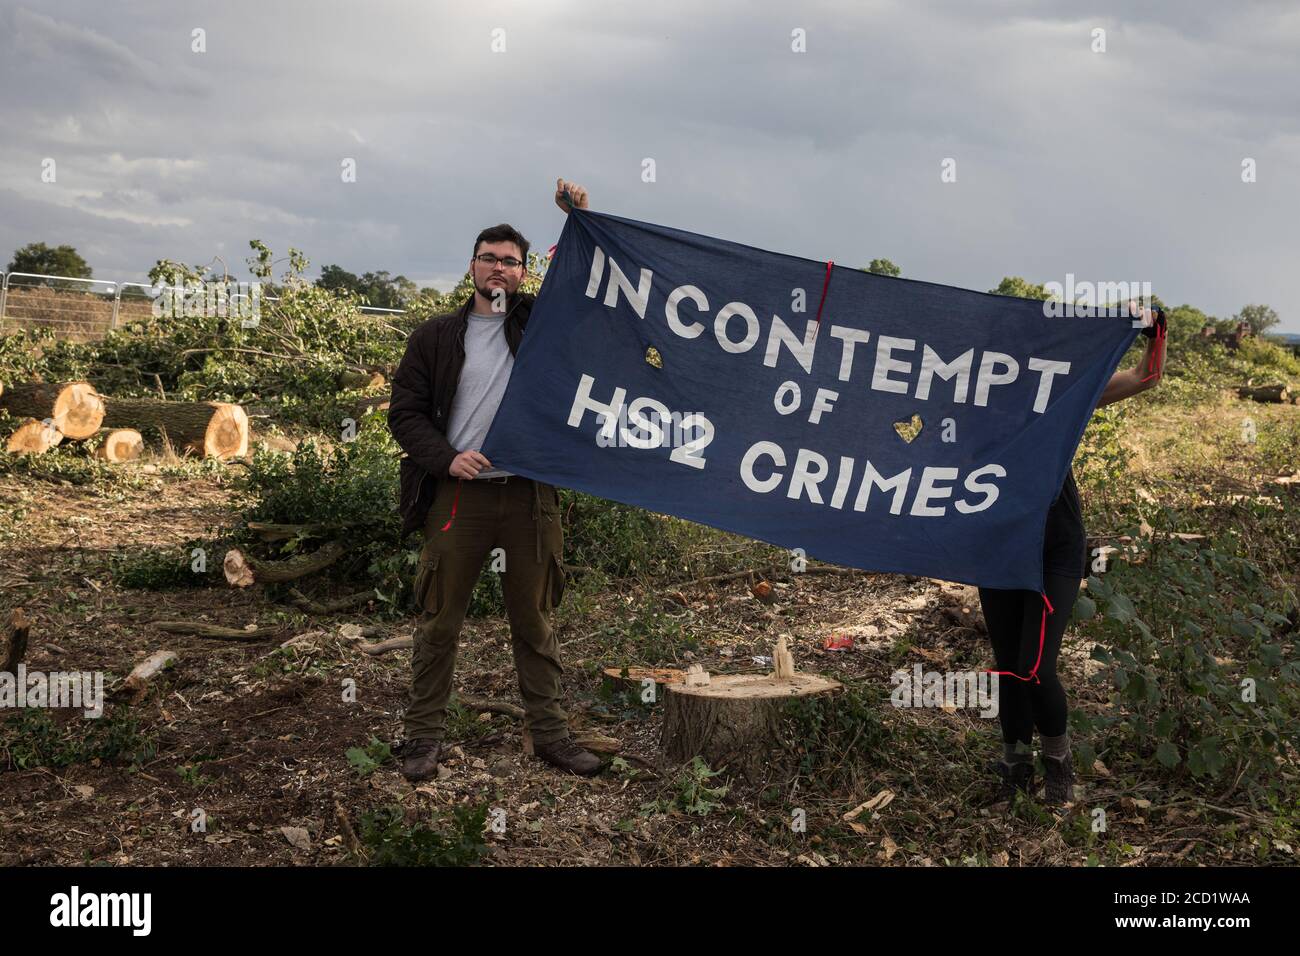 Offchurch, UK. 24th August, 2020. Anti-HS2 activists hold a banner in front of felled trees alongside the Fosse Way. Environmental activists based at wildlife protection camps in Warwickshire have been trying to prevent or delay the felling of large numbers of trees in connection with the £106bn HS2 high-speed rail link, which will destroy or significantly impact many irreplaceable natural habitats including 108 ancient woodlands. Credit: Mark Kerrison/Alamy Live News Stock Photo